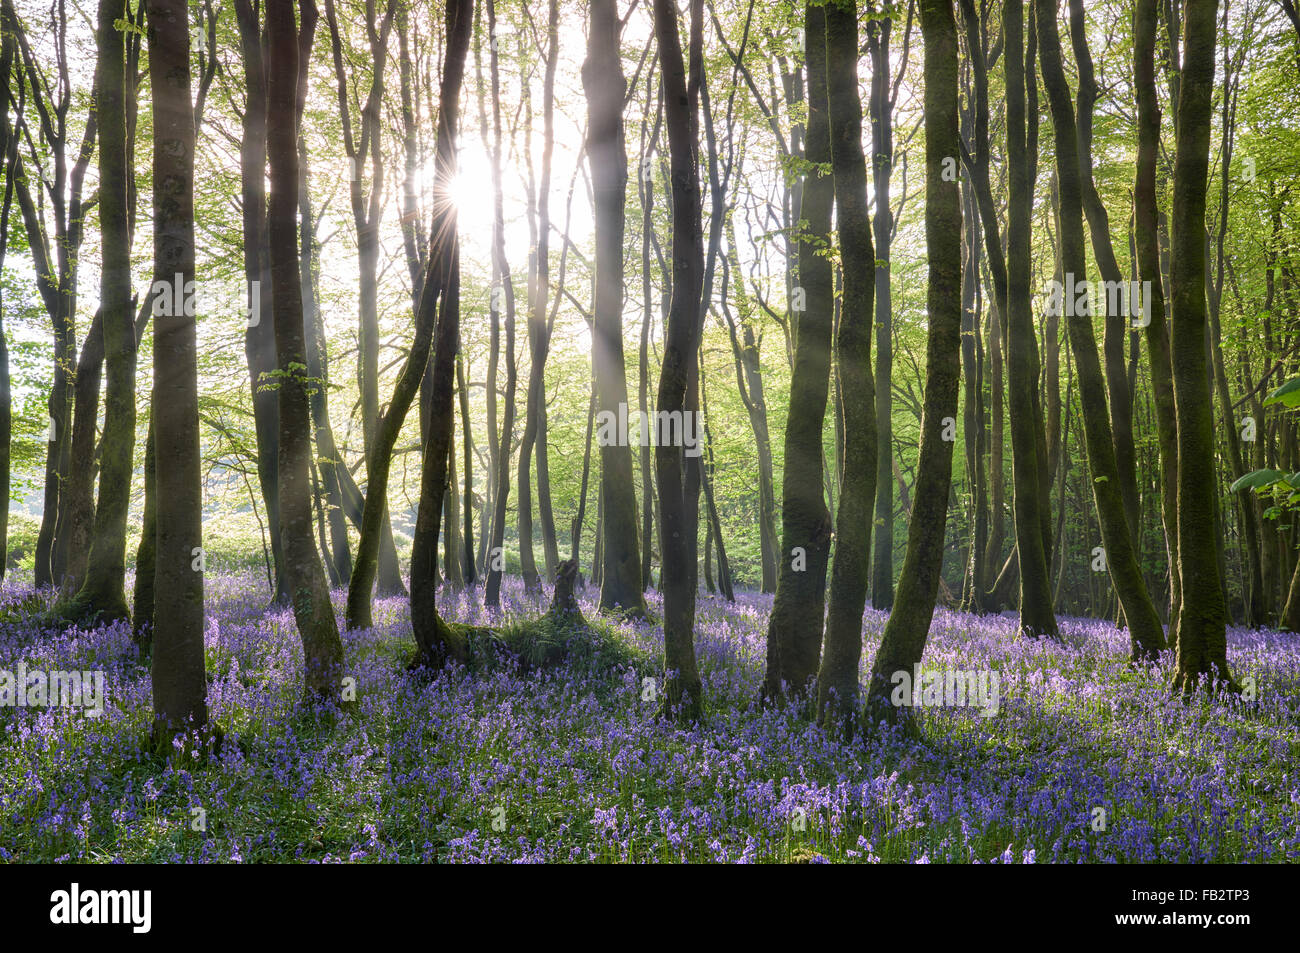 Sunlight shining between the trees and lighting up the bluebells on the woodland floor. Stock Photo